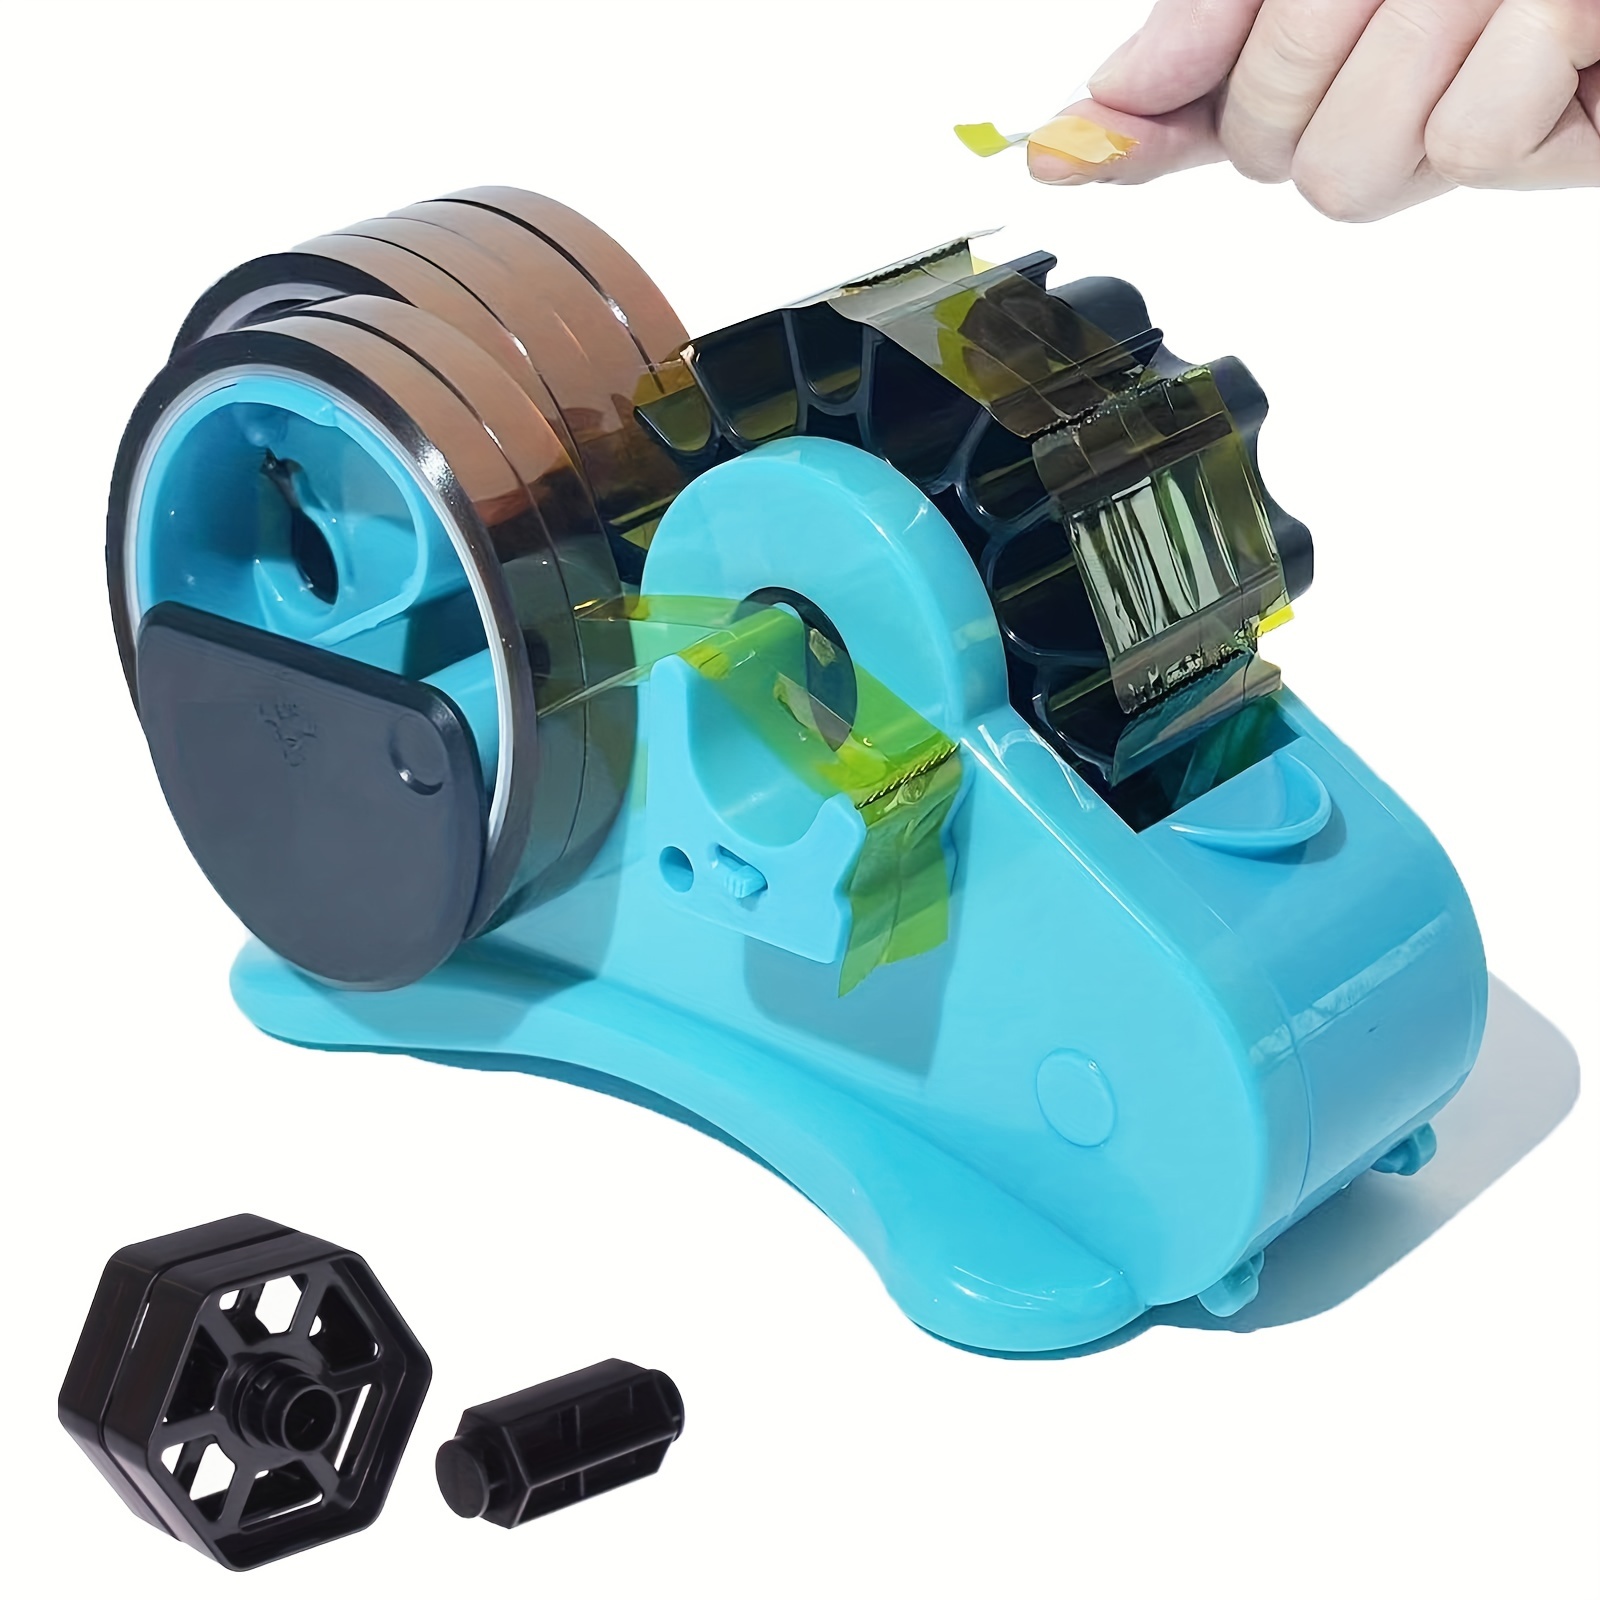 Multiple Roll Cut Heat Tape Dispenser Sublimation for Heat Transfer Tape,Tape Dispenser with 1 inch and 3 inch Core Blue, Size: 35